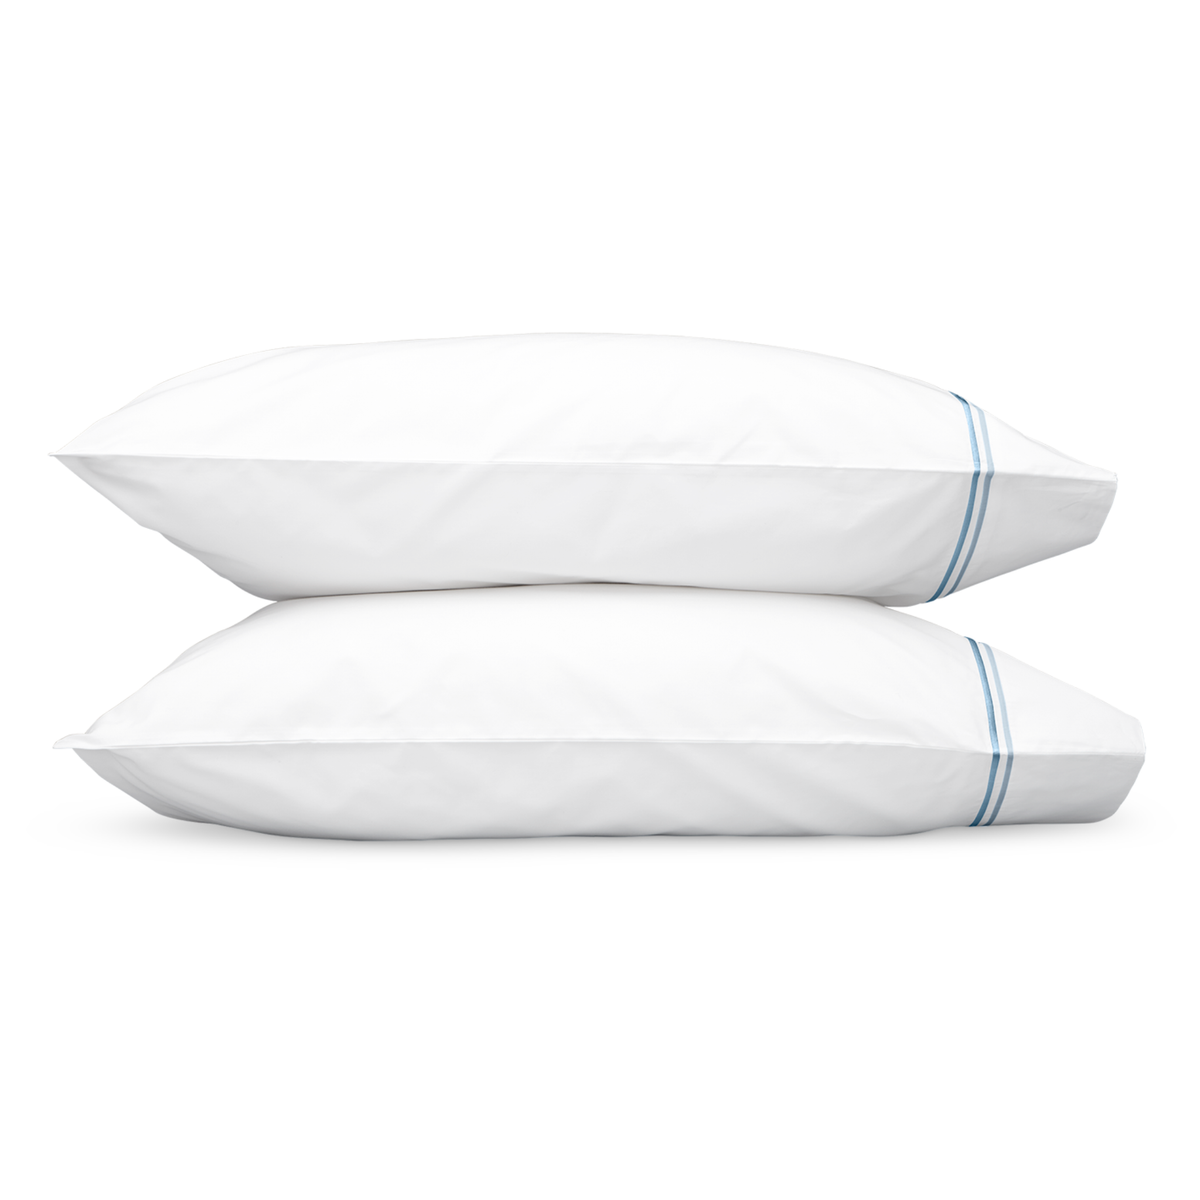 Pair of Pillowcases in Light Blue Color Matouk Essex Bedding Collection